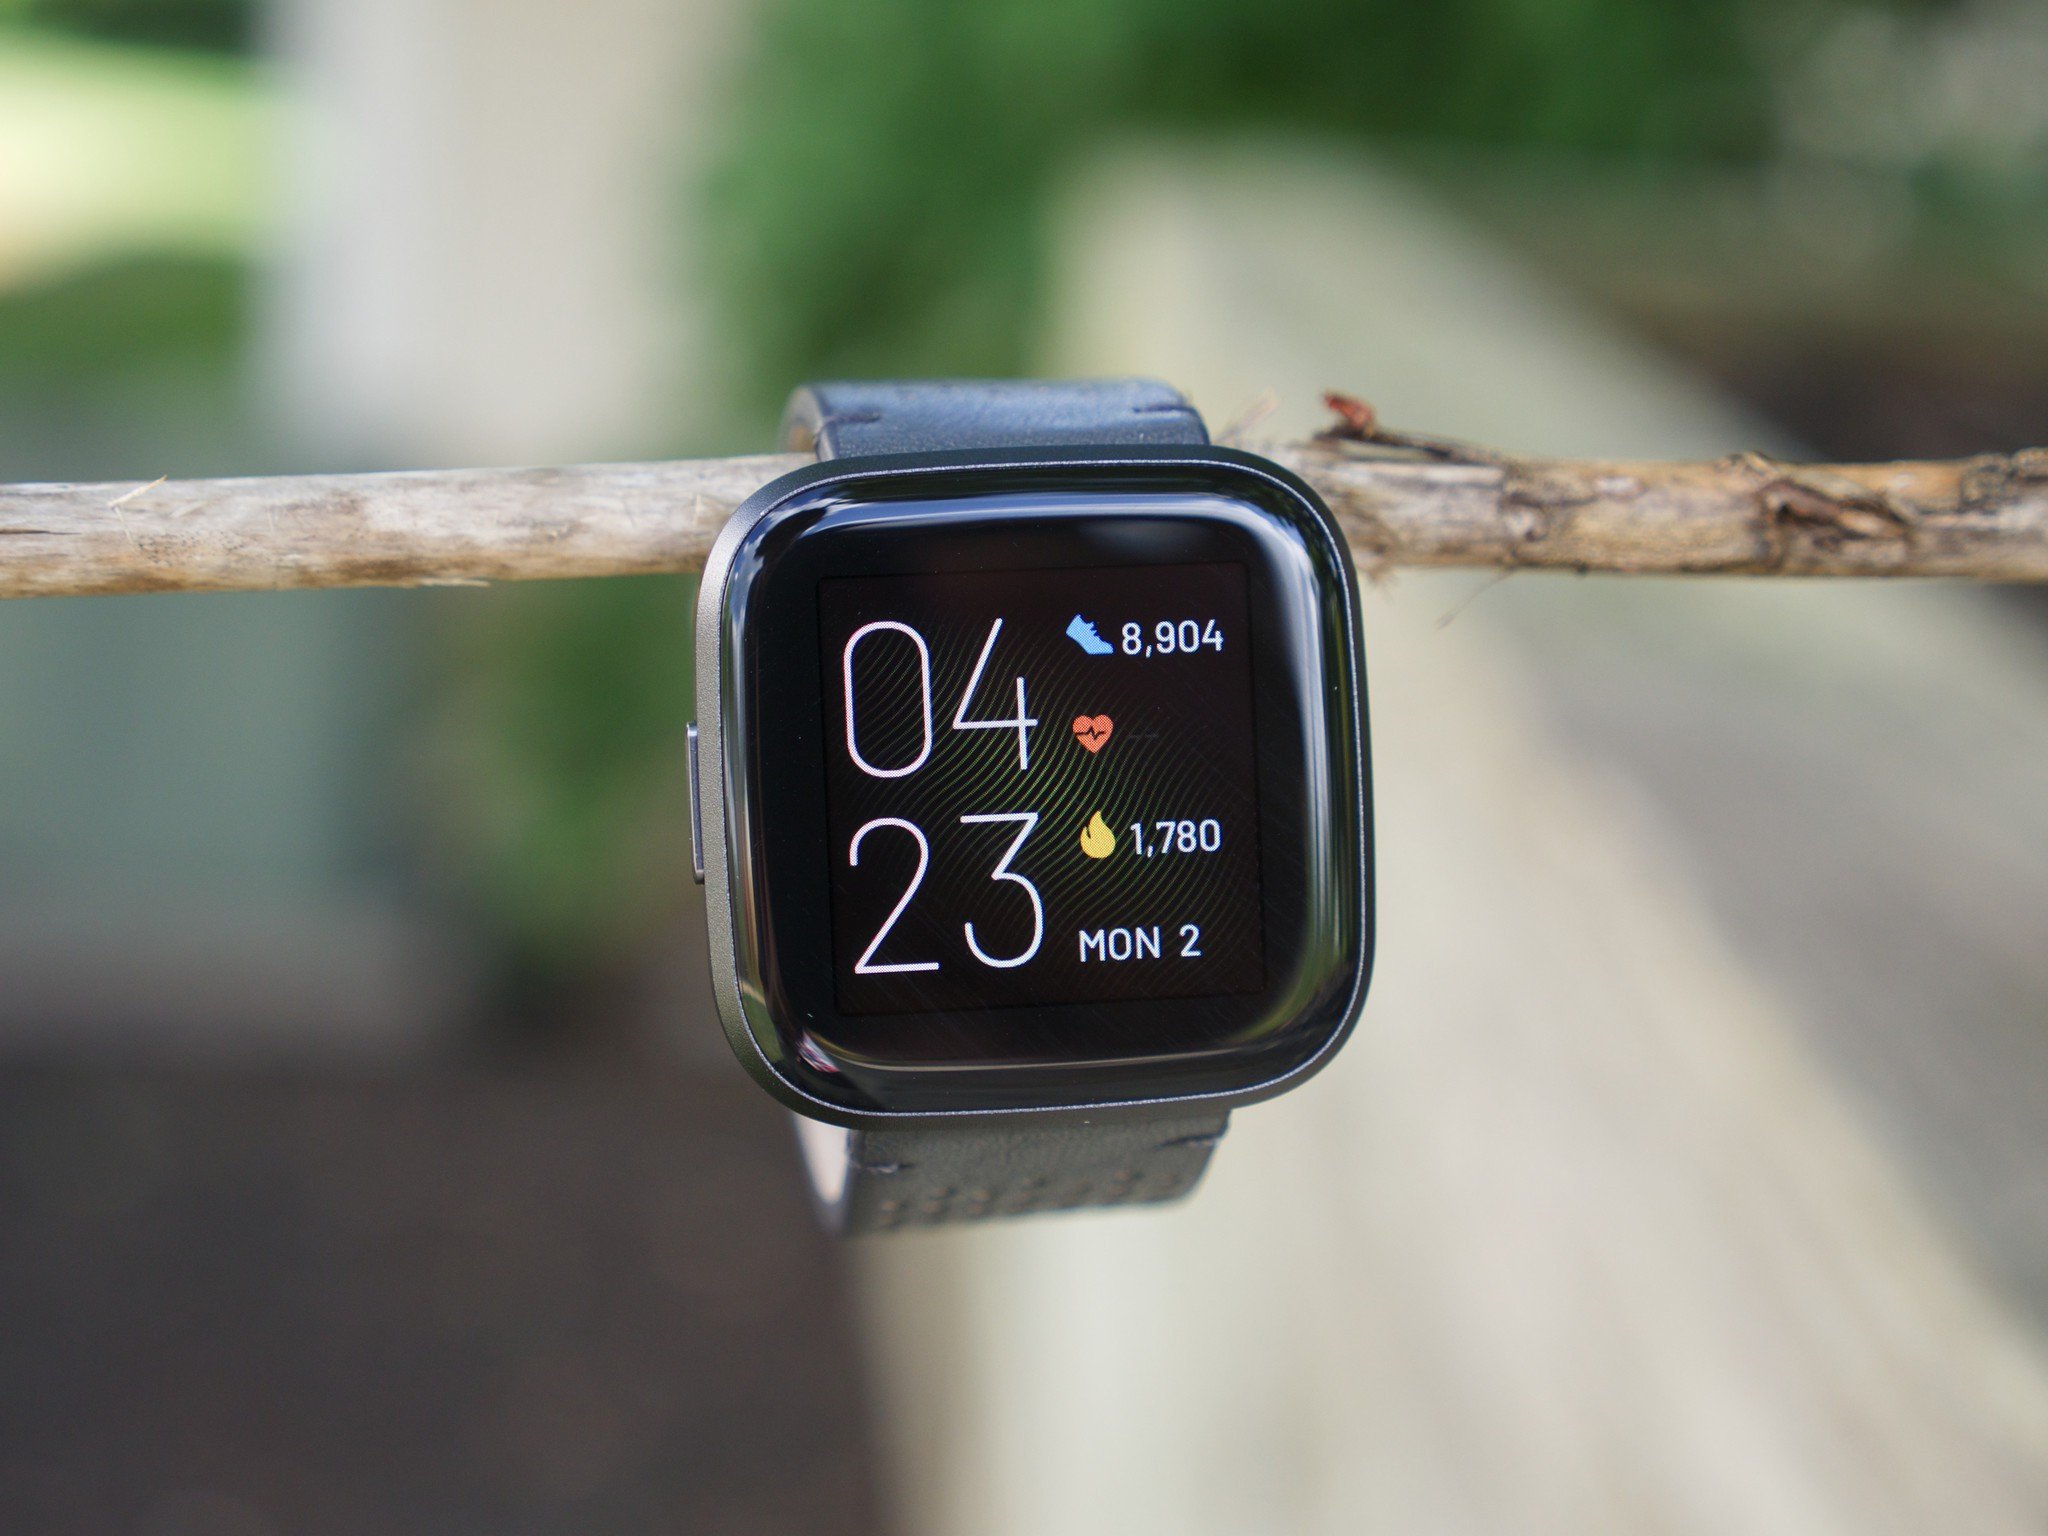 Save over $50 on this Prime Day deal on the Fitbit Versa 2 | Android